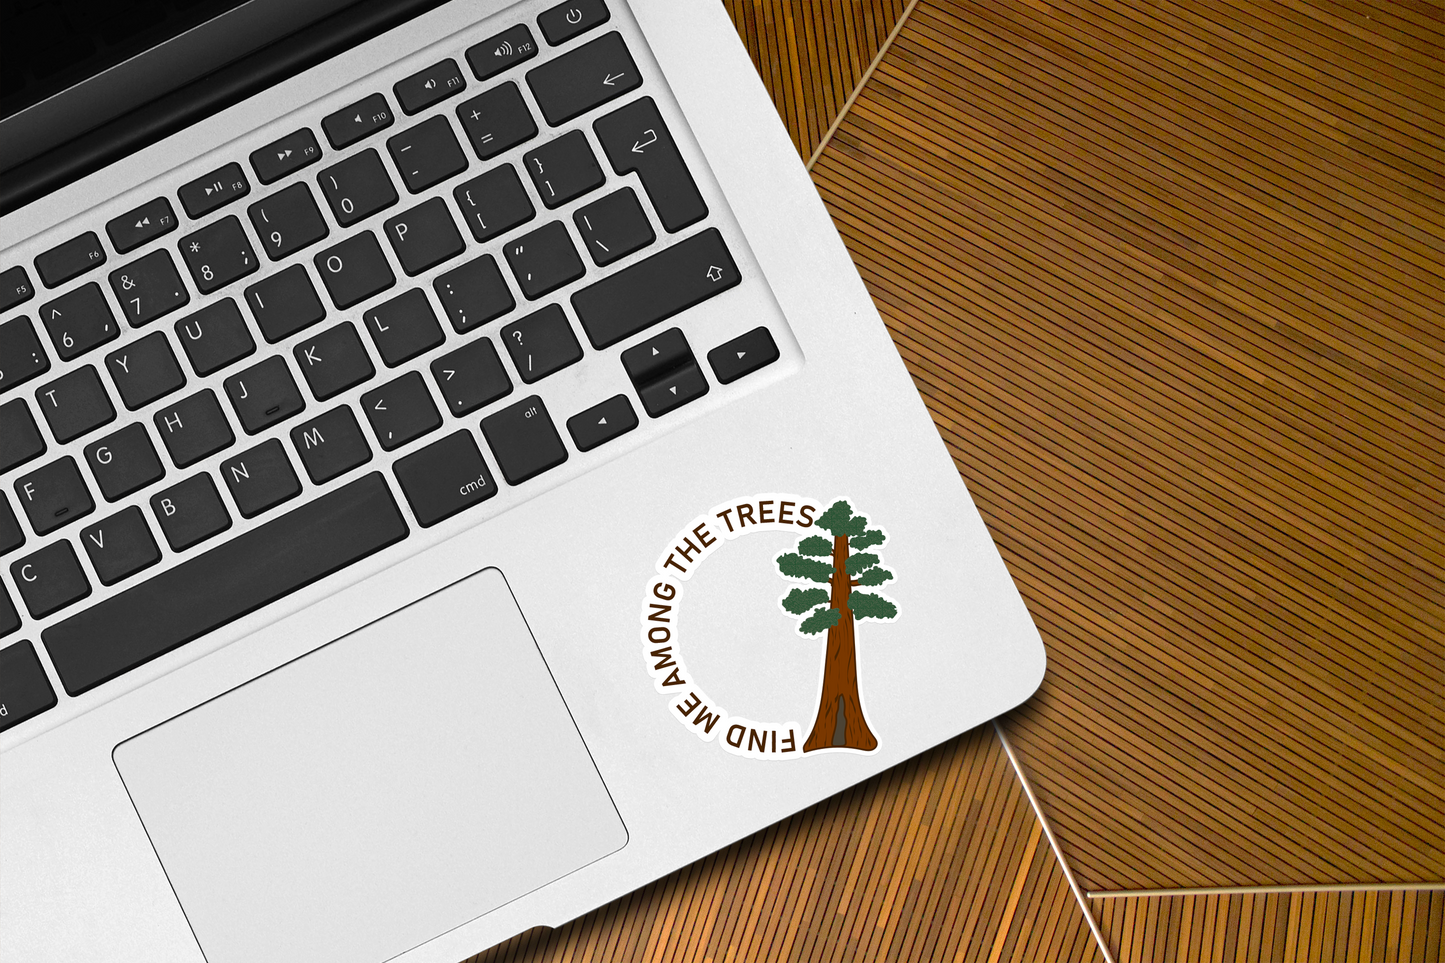 Giant Sequoia Sticker| Find Me Among the Trees Sticker